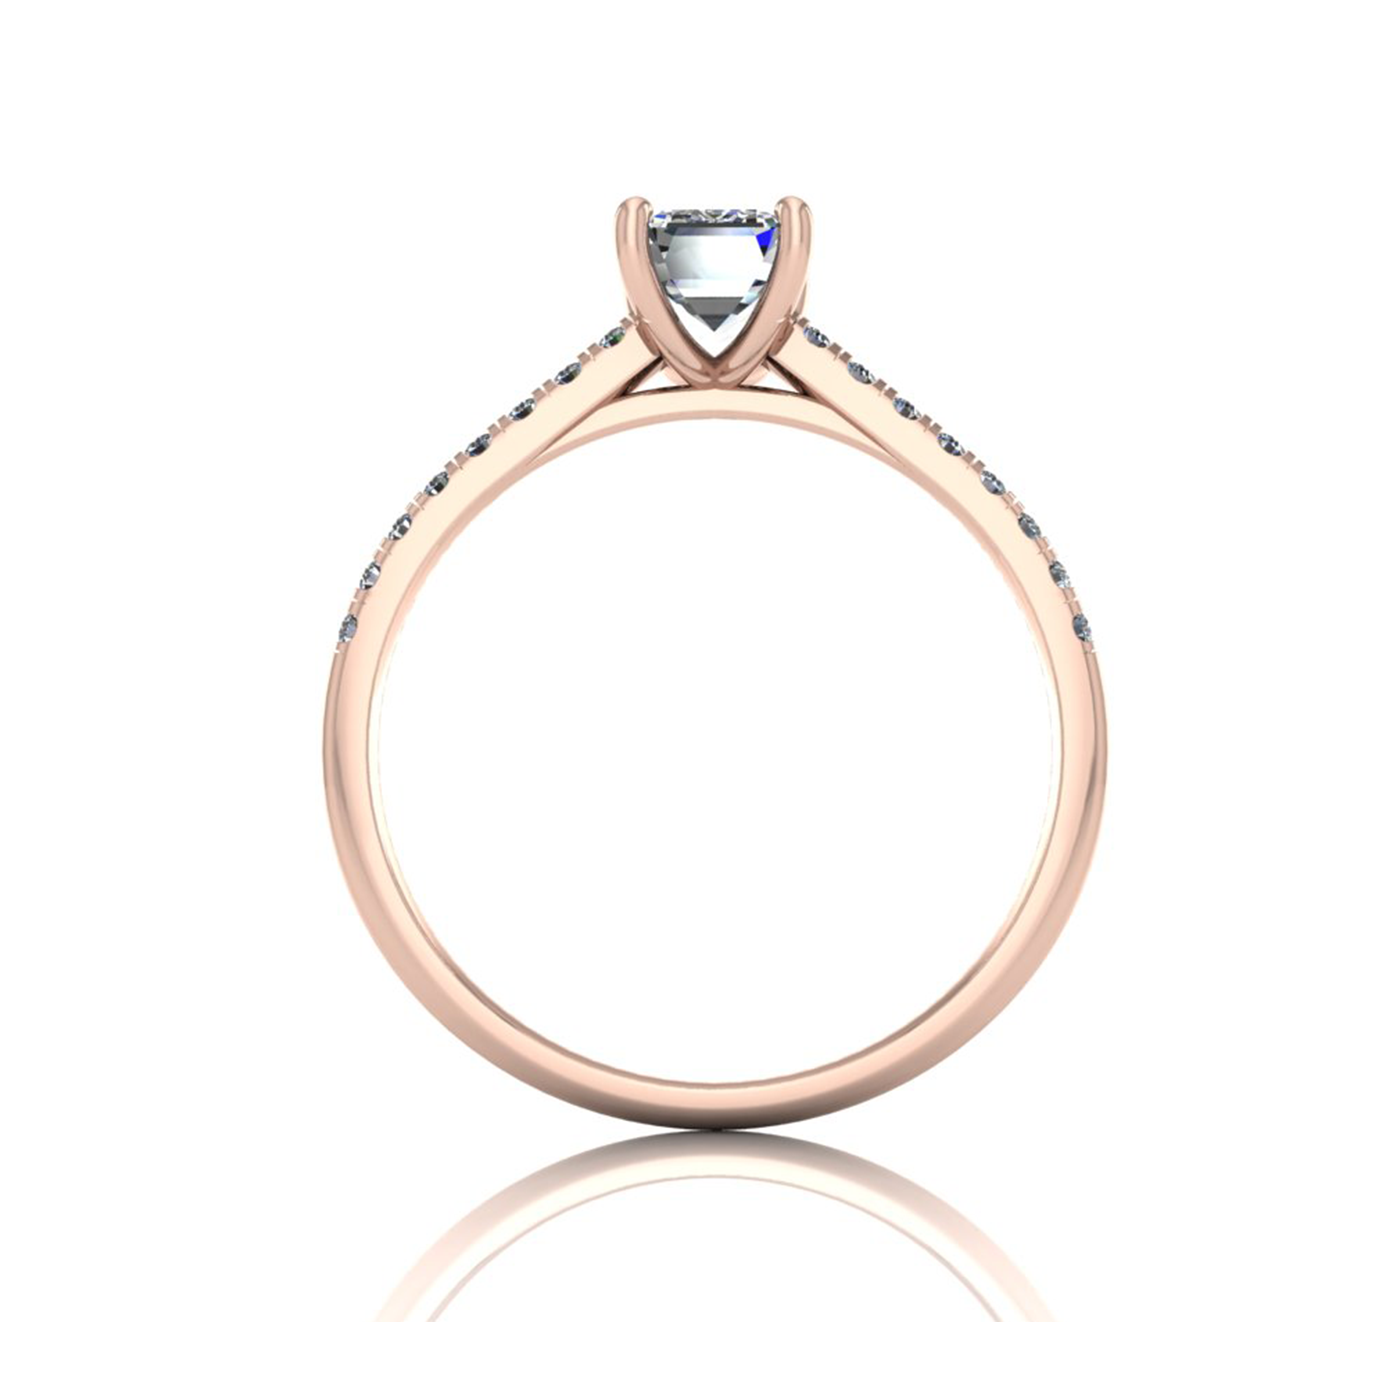 18k rose gold 0,80 ct 4 prongs emerald cut diamond engagement ring with whisper thin pavÉ set band